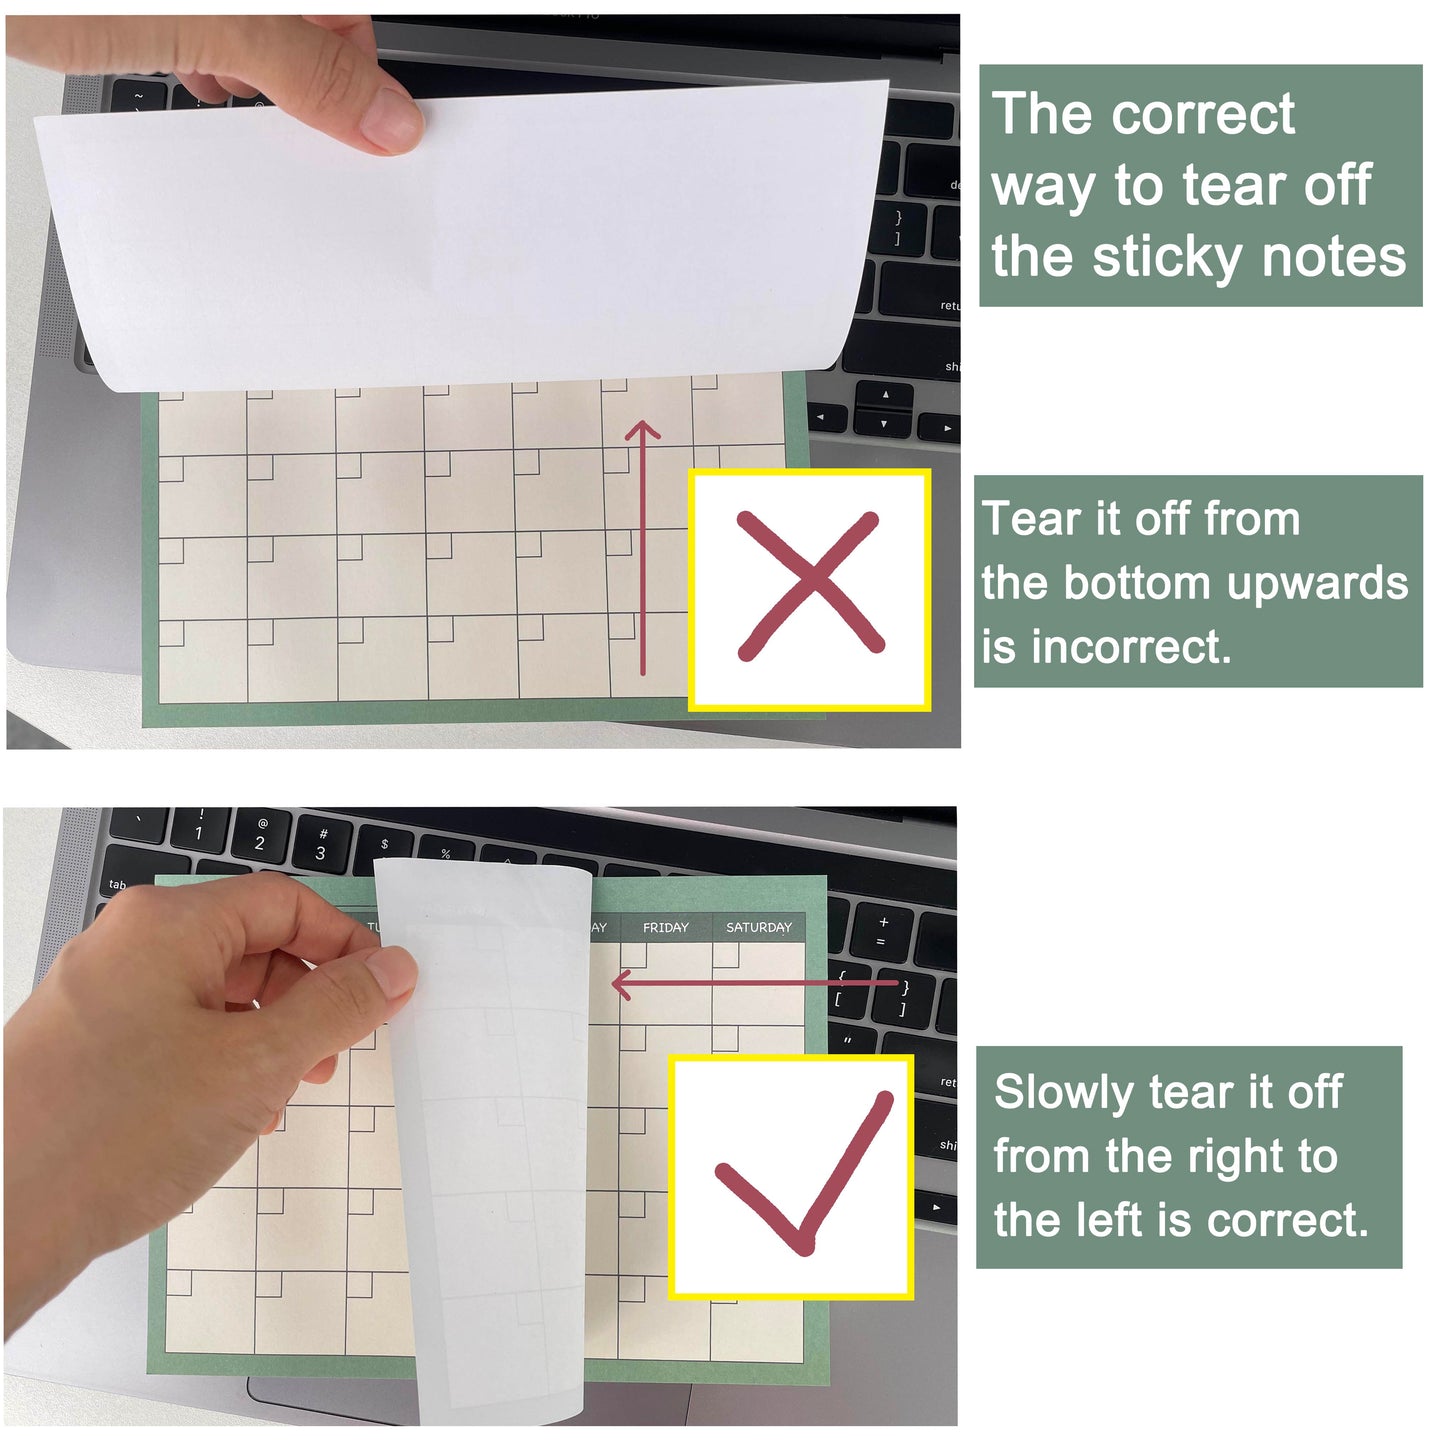 Large Sticky Notes 6x8, Post it Notes, Noted Sticky Notes, Weekly to do List & Calendar Pad, Strong Adhesive, 8 Pads/160 Sheets